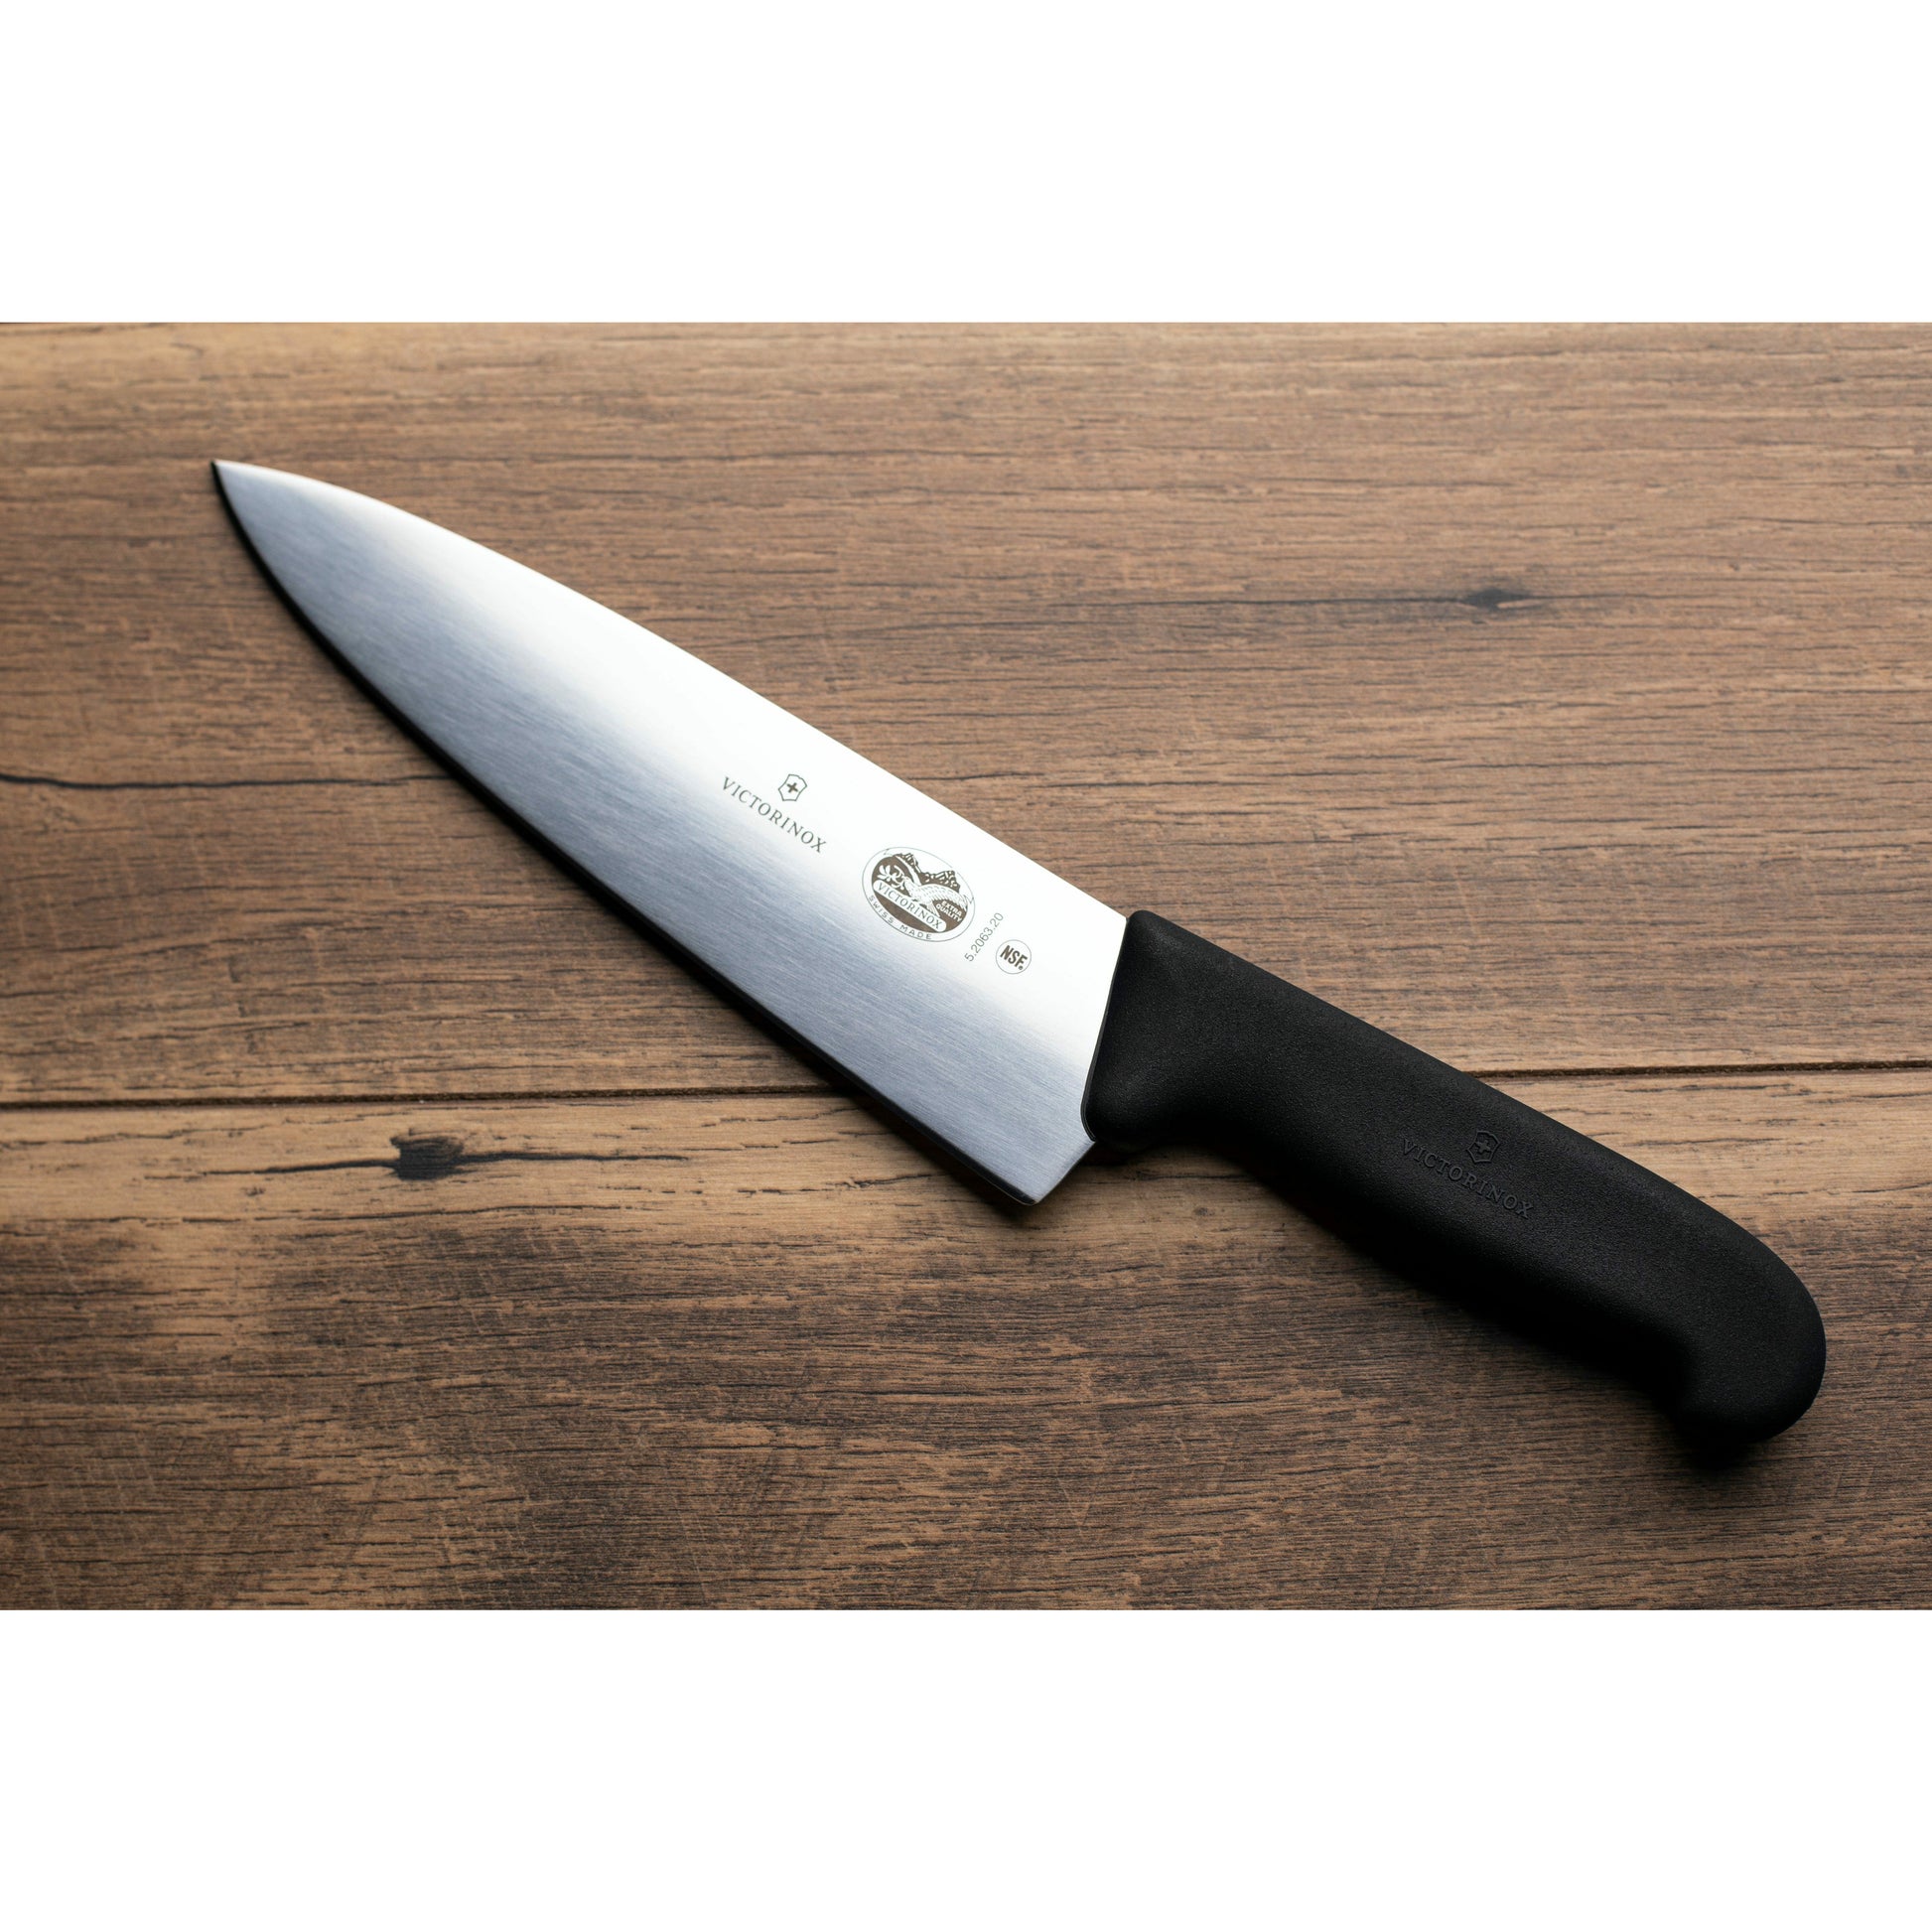 Victorinox Fibrox Pro 10” Chef's Knife w/ Rounded Tip – PERFECT EDGE CUTLERY